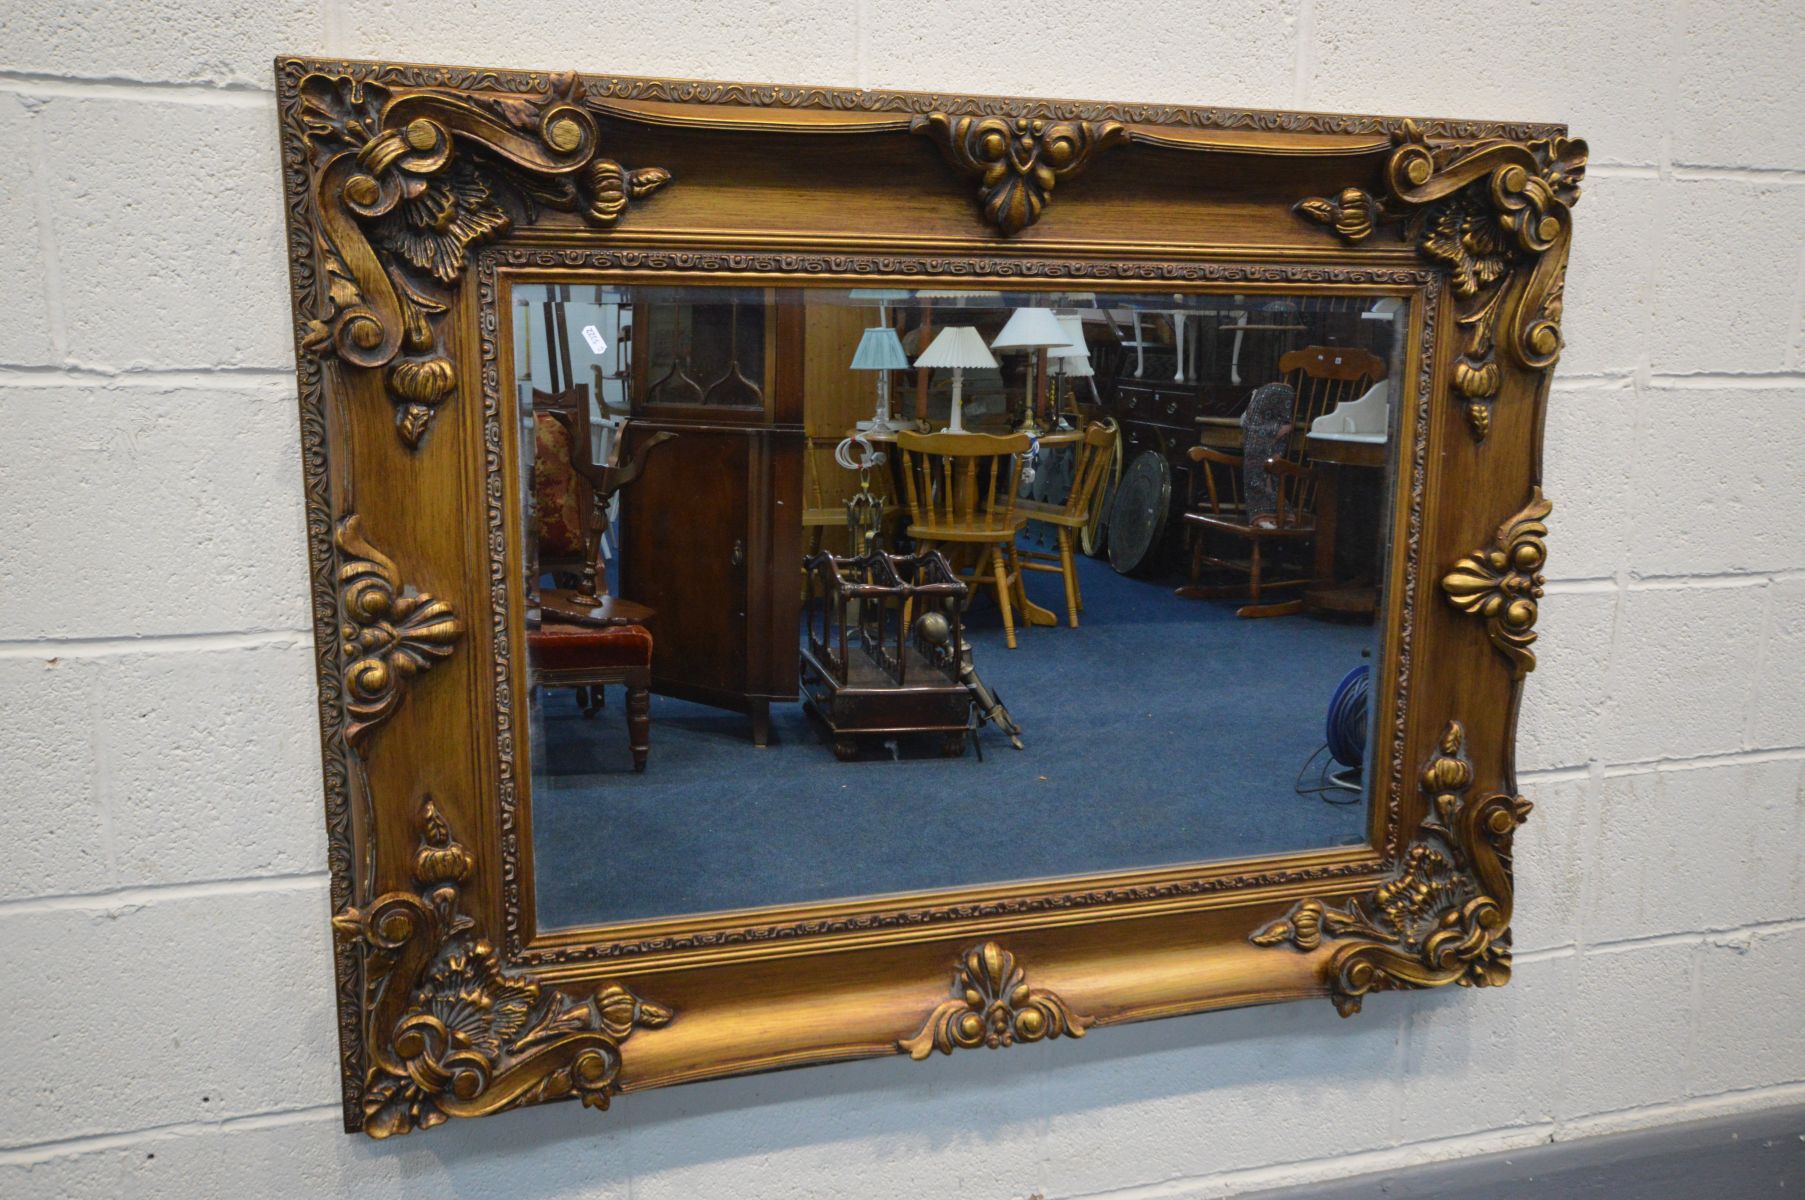 A FOLIATE GILT ON RESIN BEVELLED EDGE WALL MIRROR, 126cm x 96cm (condition - some minor chips to